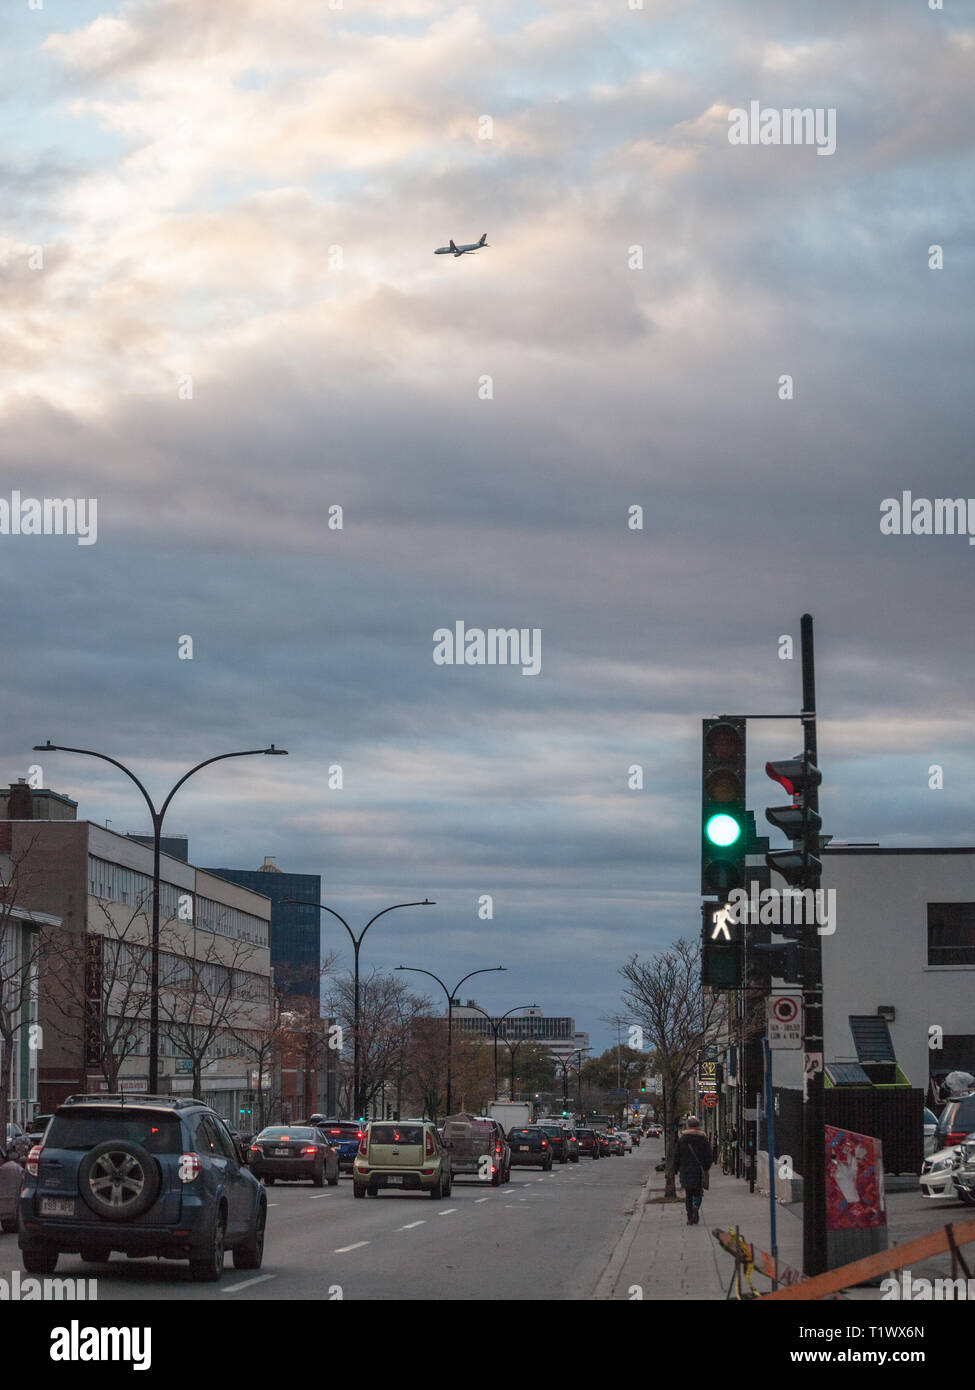 MONTREAL, CANADA - NOVEMBER 8, 2018: Cars driving in a traffic jam on Saint Laurent Boulevard in Montreal, Quebec, in the evening, with a plane landin Stock Photo